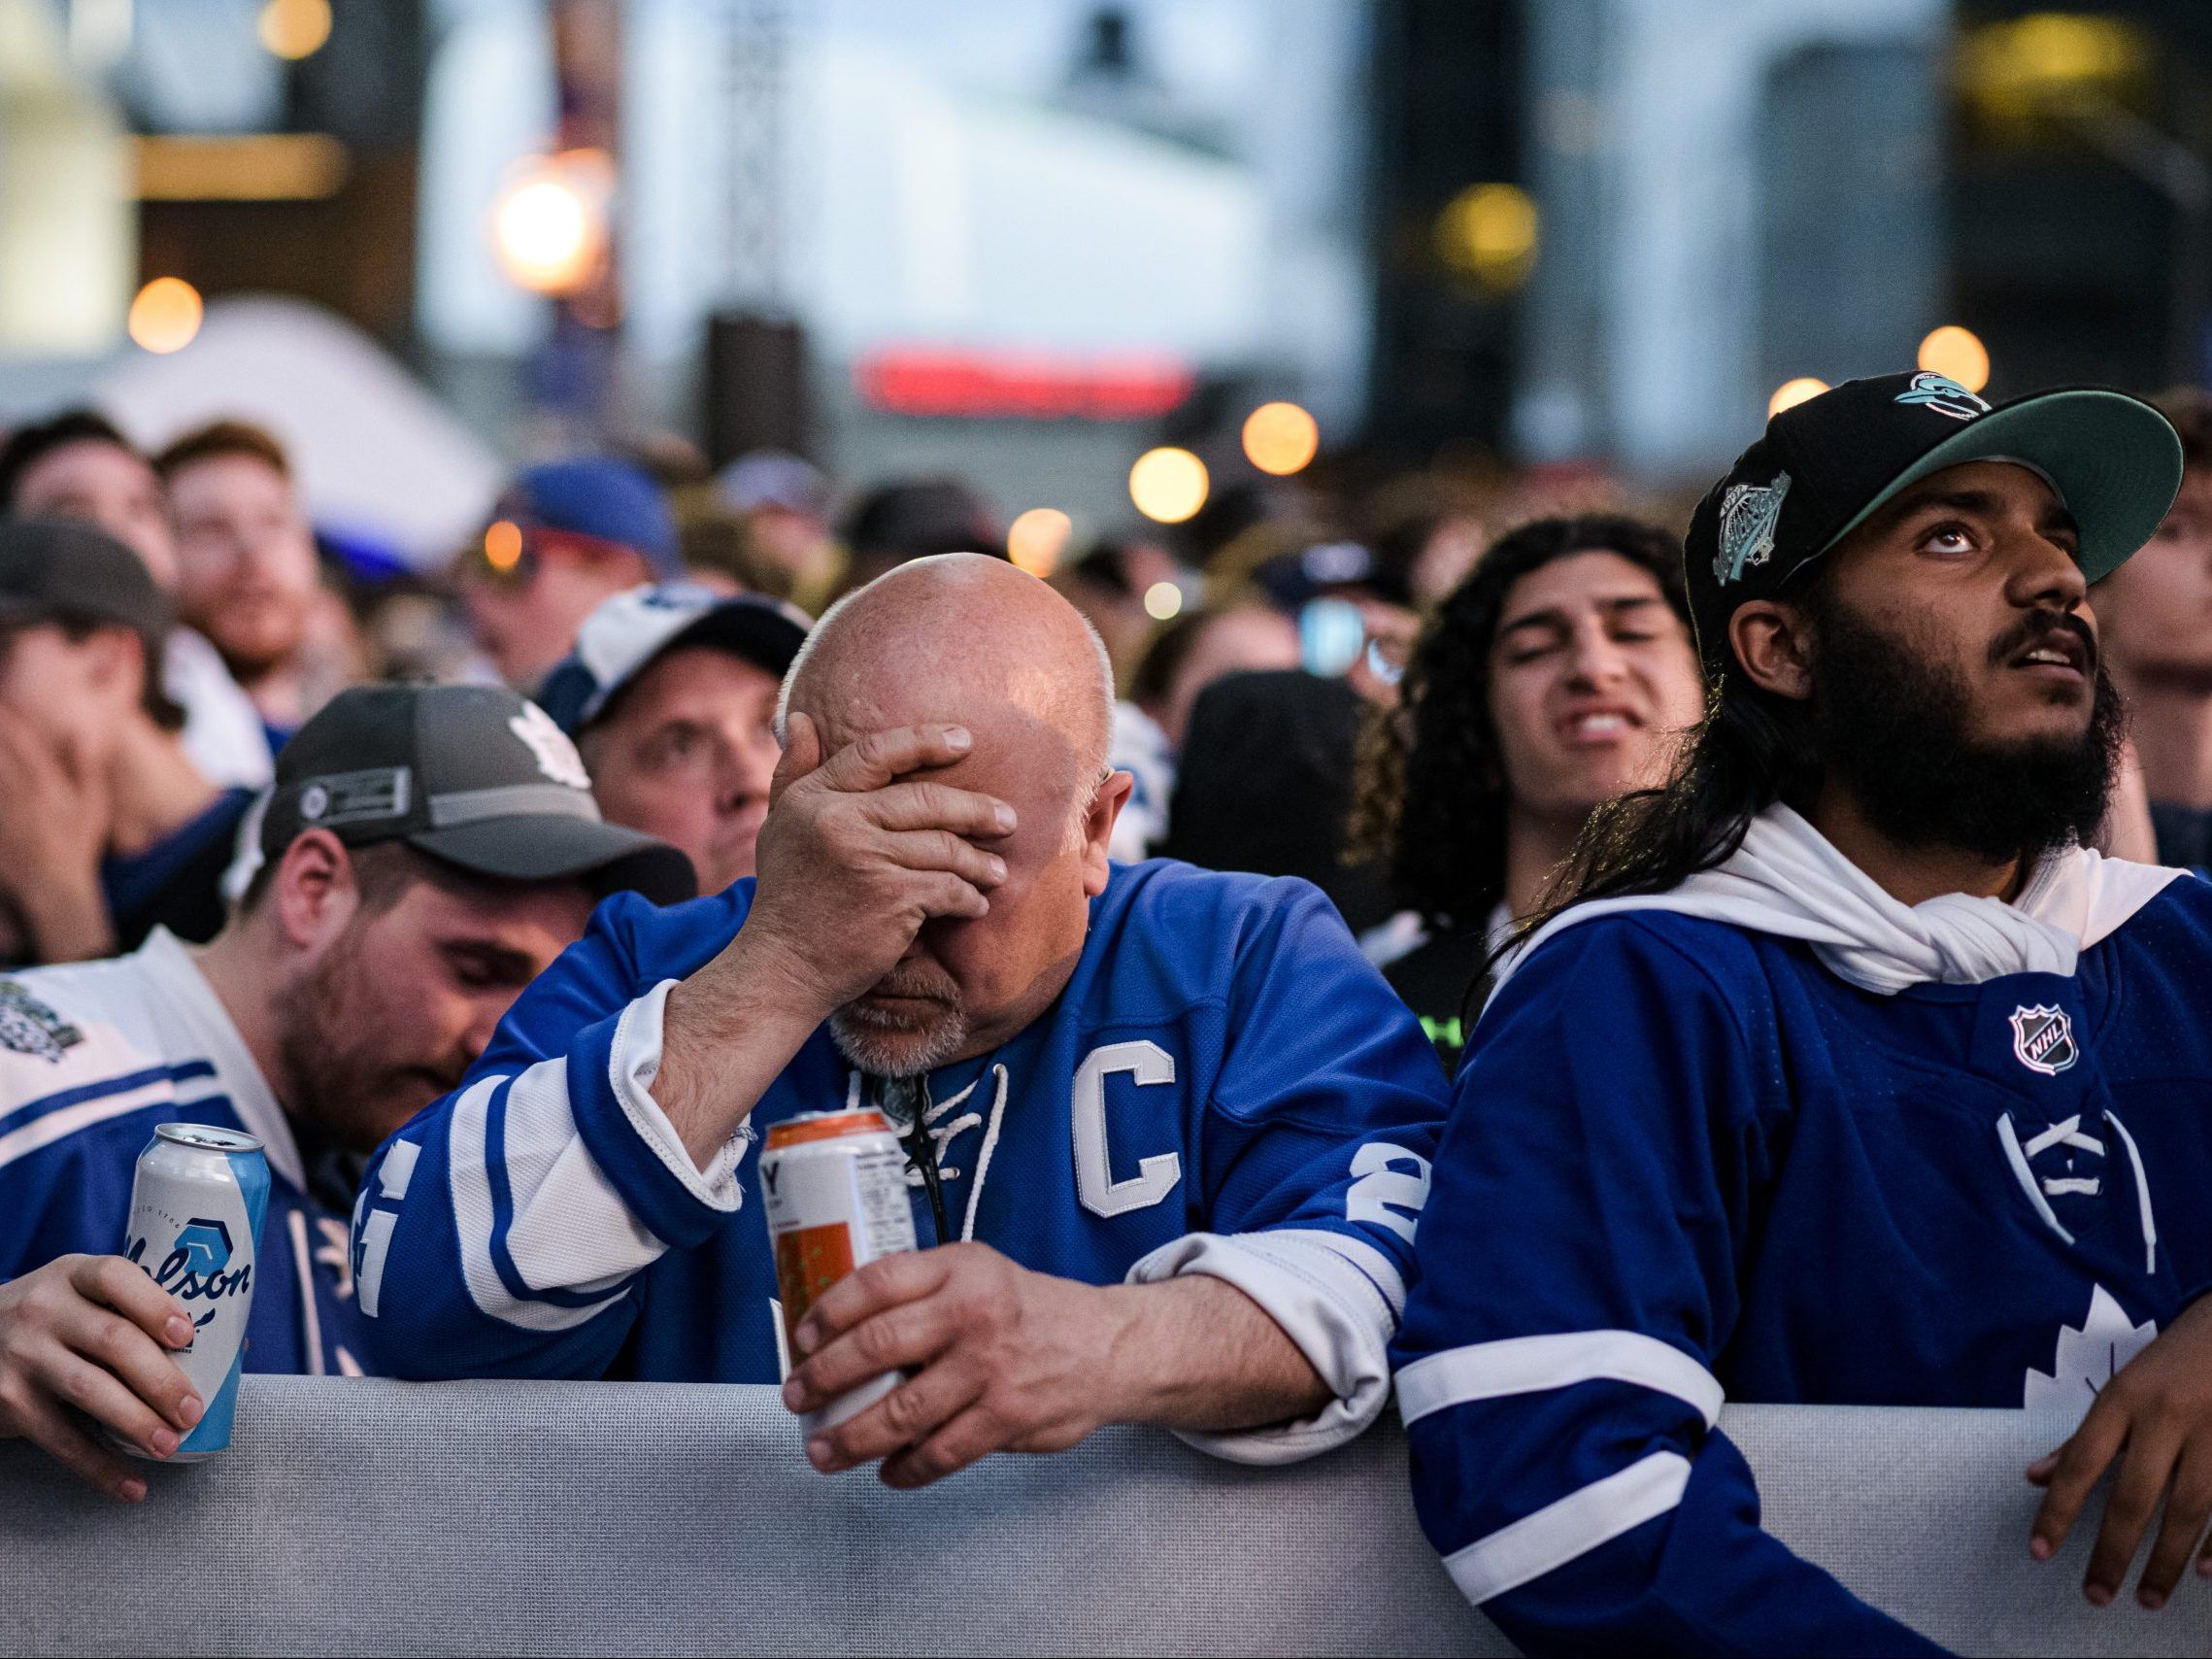 5 things Maple Leaf fans are wishing for in 2023